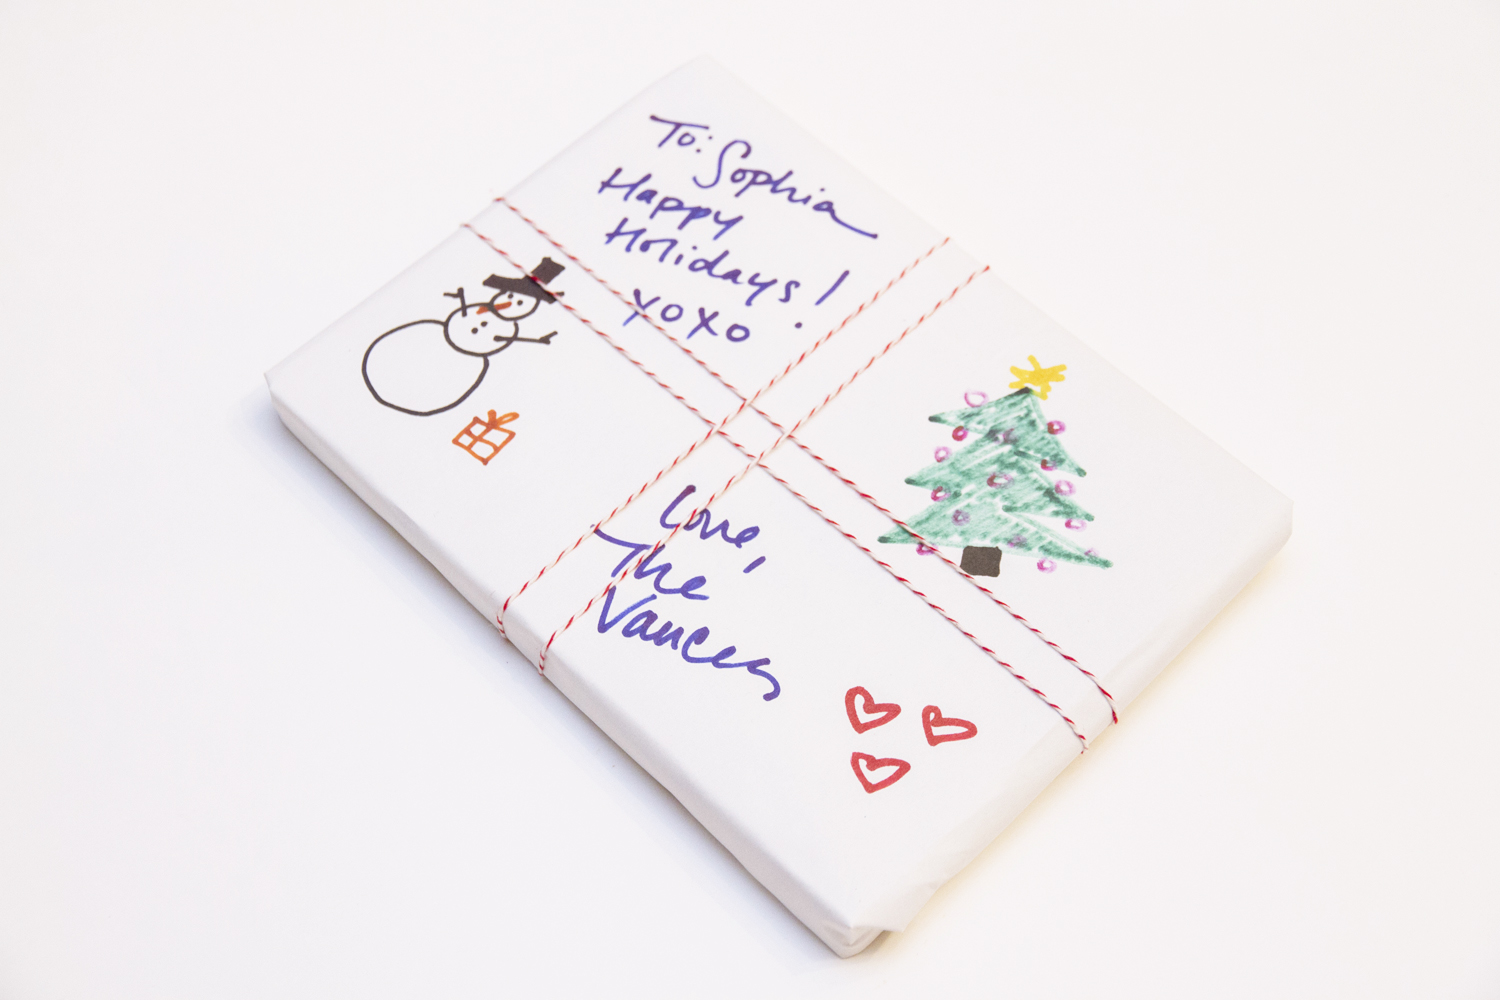 Present wrapped in white paper with hand written message